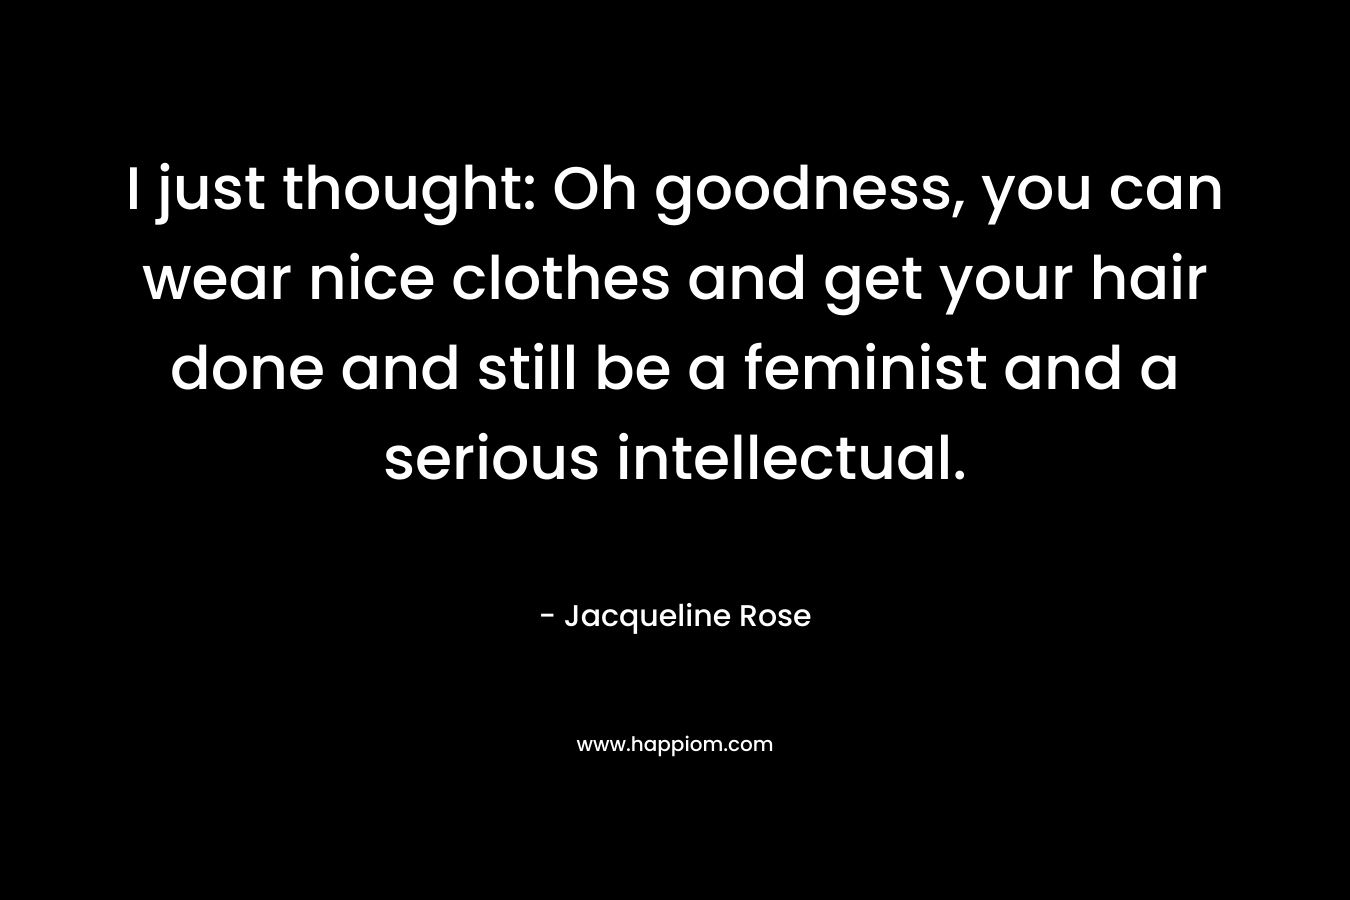 I just thought: Oh goodness, you can wear nice clothes and get your hair done and still be a feminist and a serious intellectual. – Jacqueline Rose